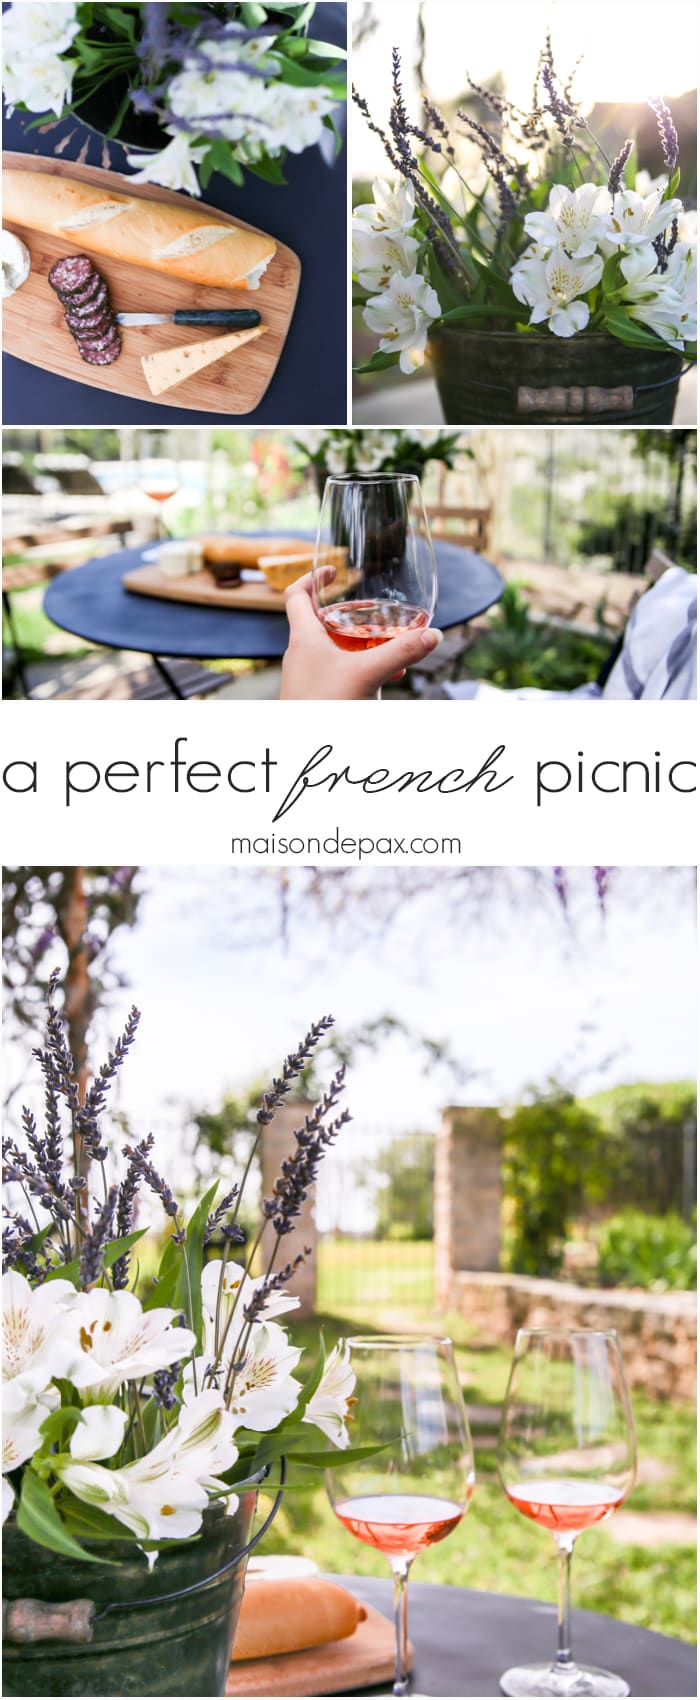 Simple rustic elegance! A perfect French picnic | maisondepax.com